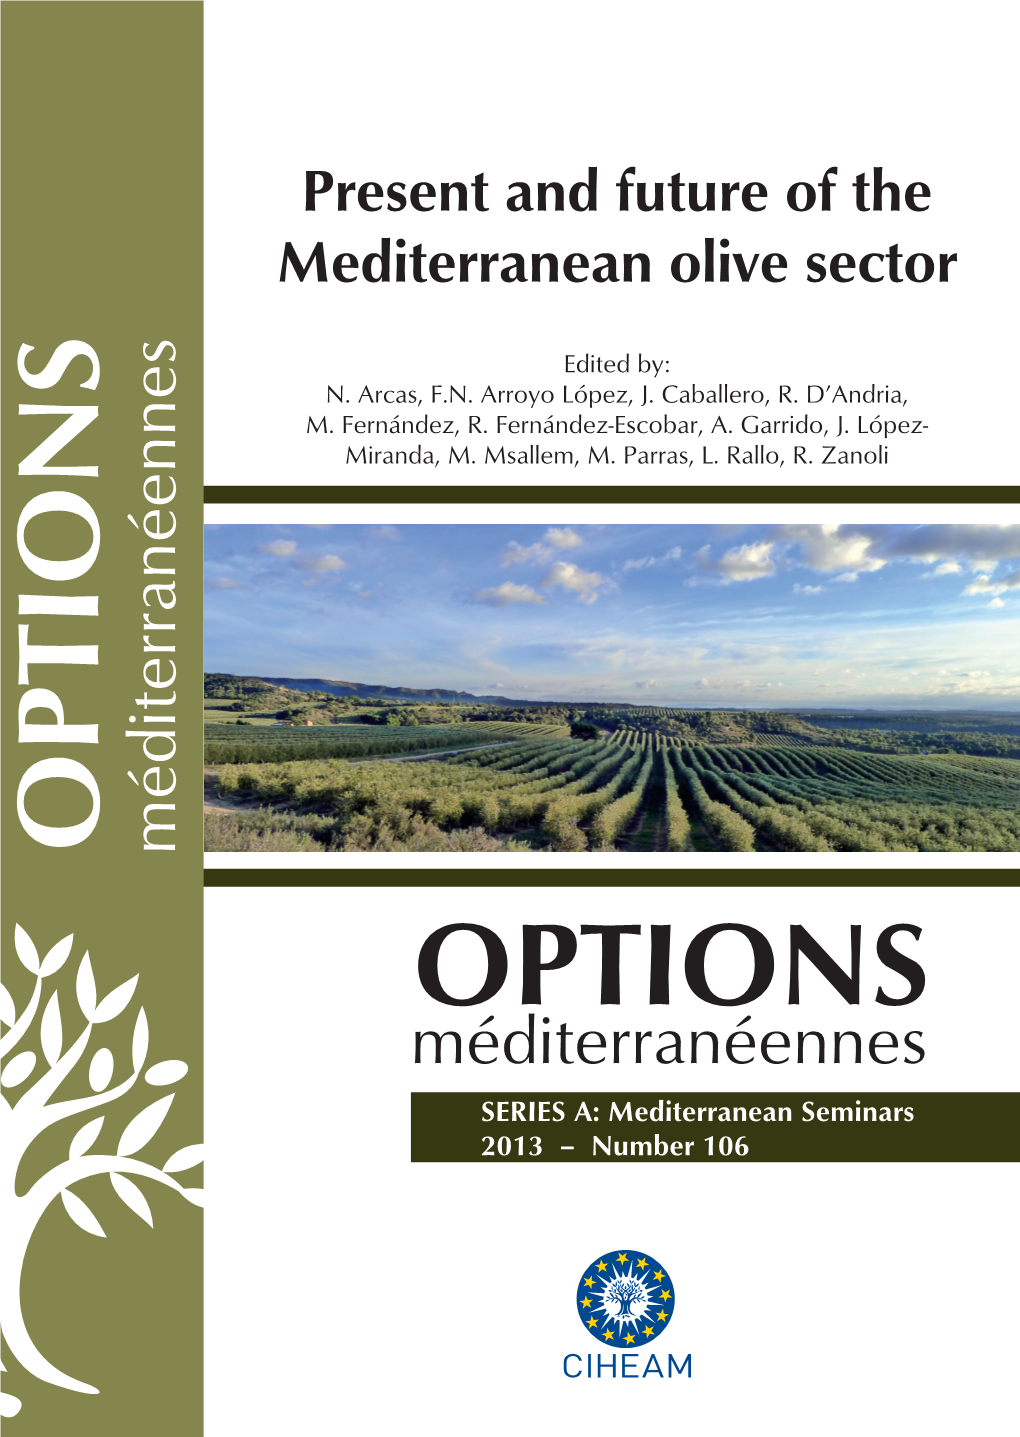 Present and Future of the Mediterranean Olive Sector” OPTIONS OPTIONS Méditerranéennes from 26 to 28 November 2012